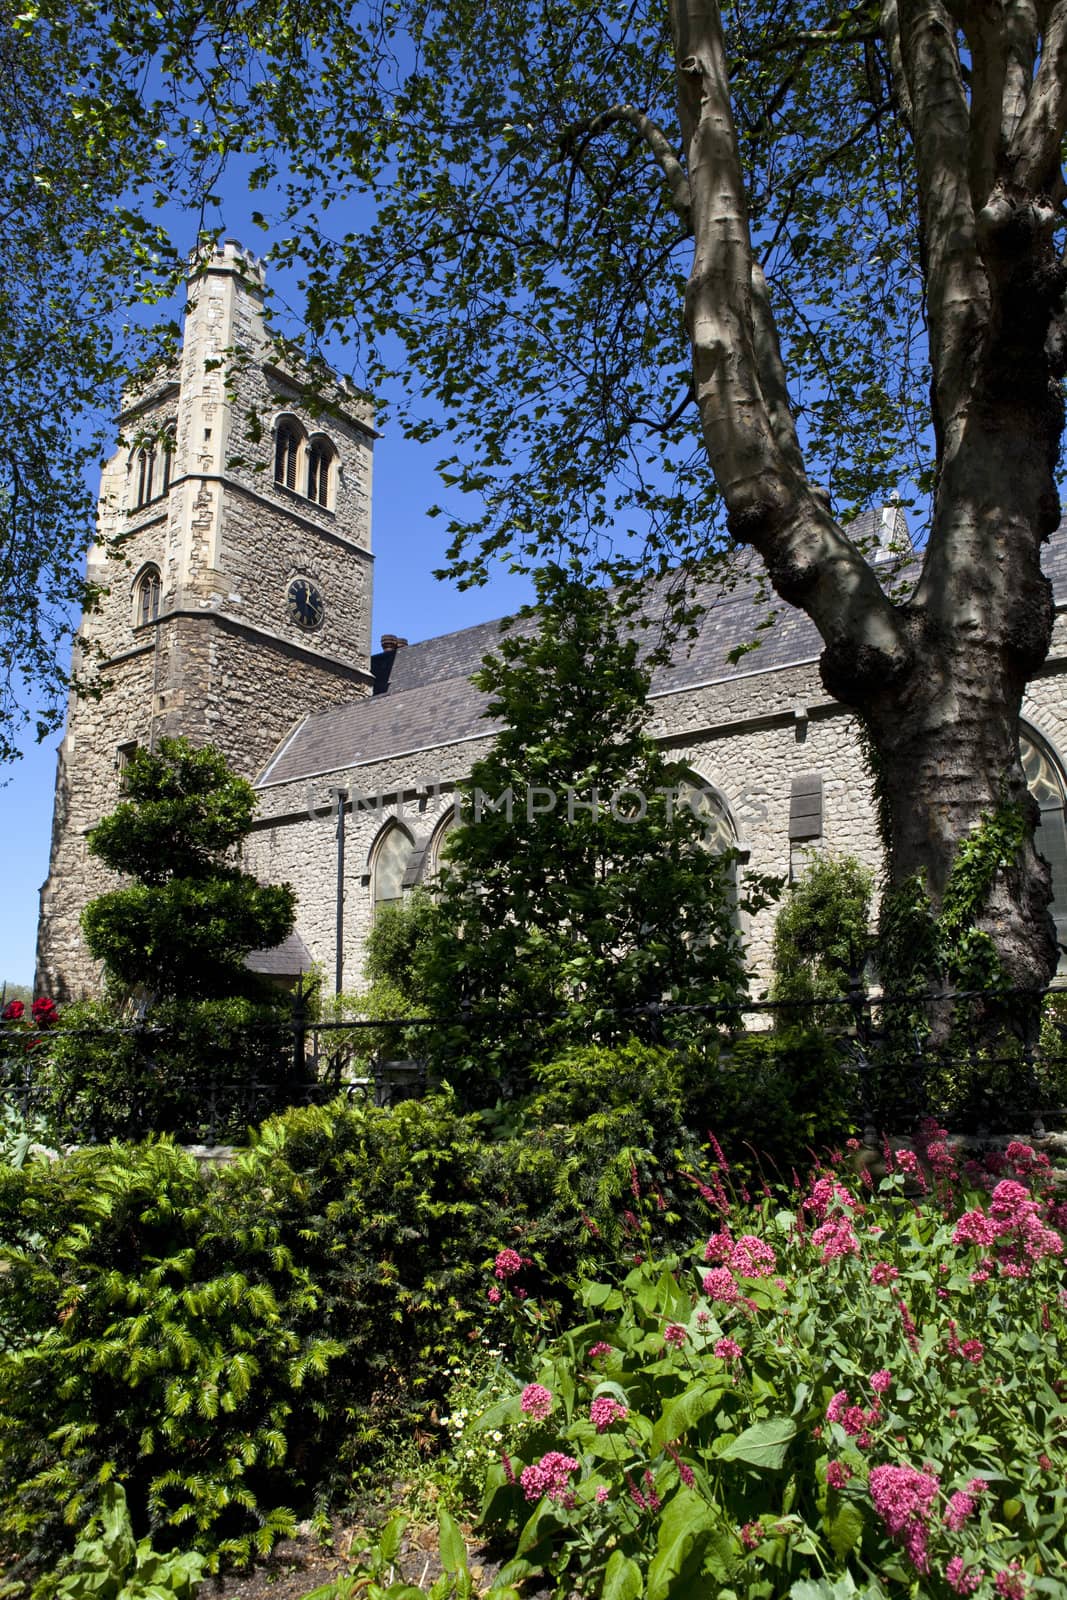 The church of St Mary at Lambeth which contains the Garden Museum in London.